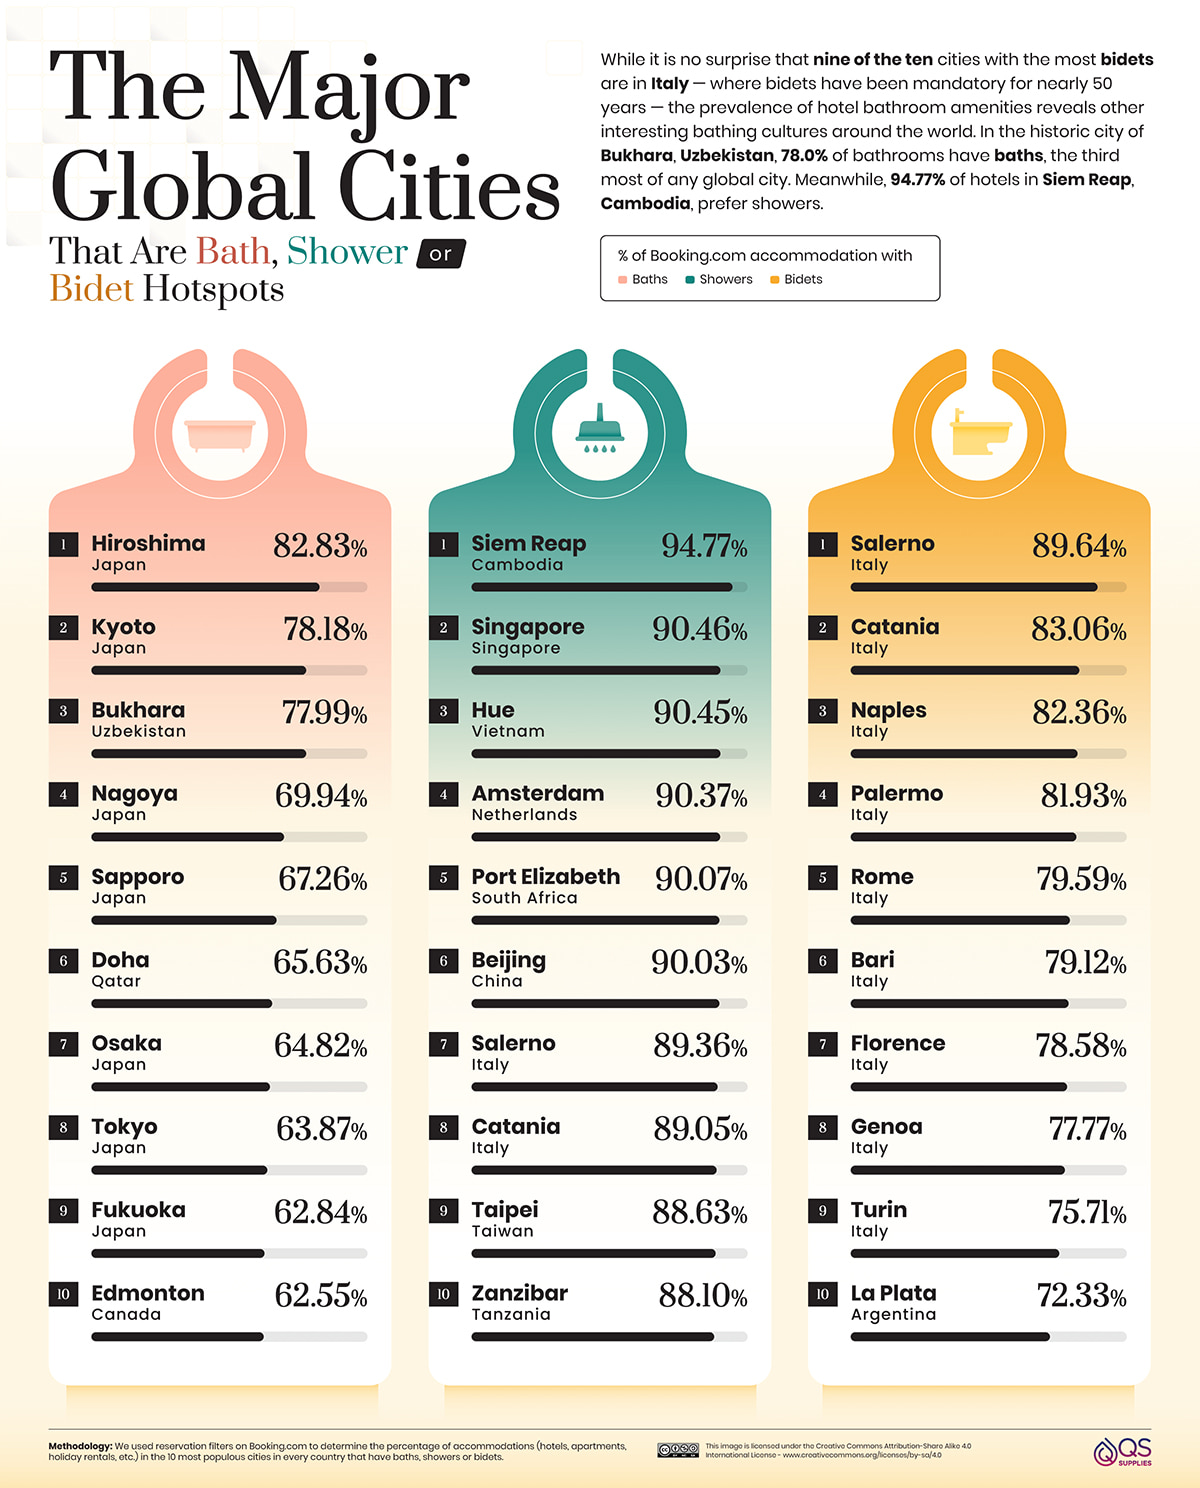 The Major Global Cities That are Bath, Shower or Bidet Hotspots